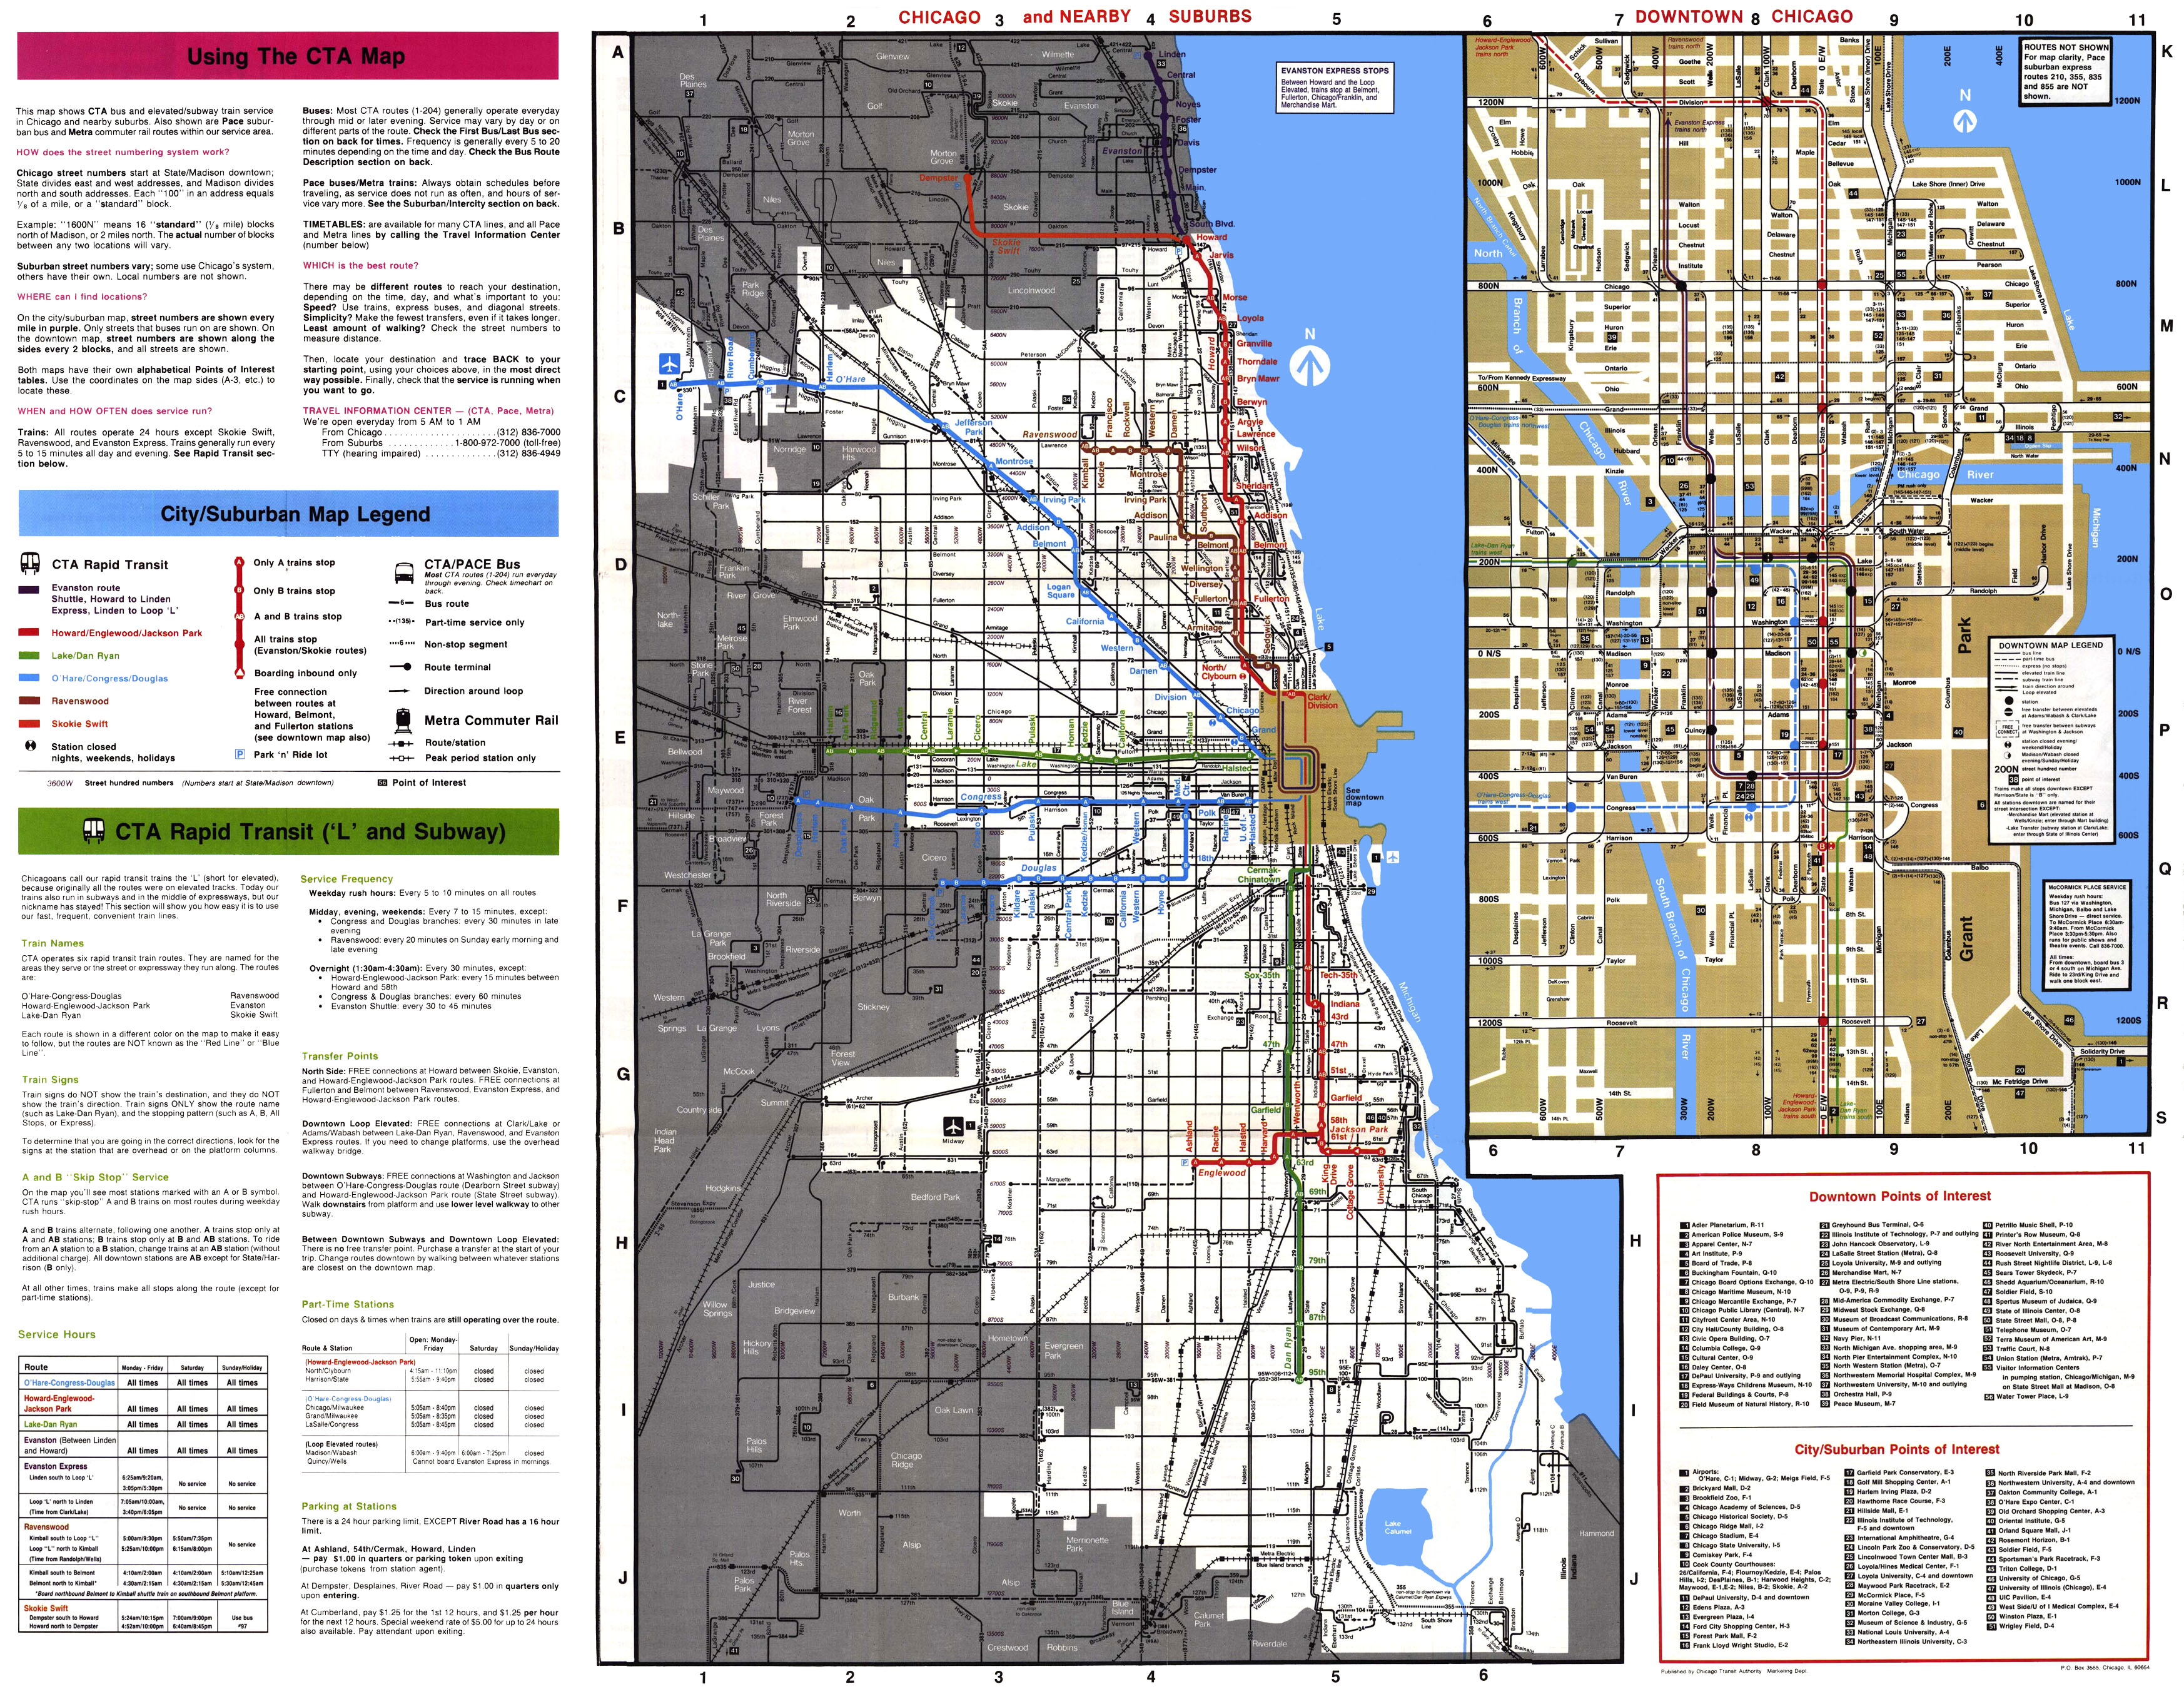 Chicago L Org System Maps Route Maps.